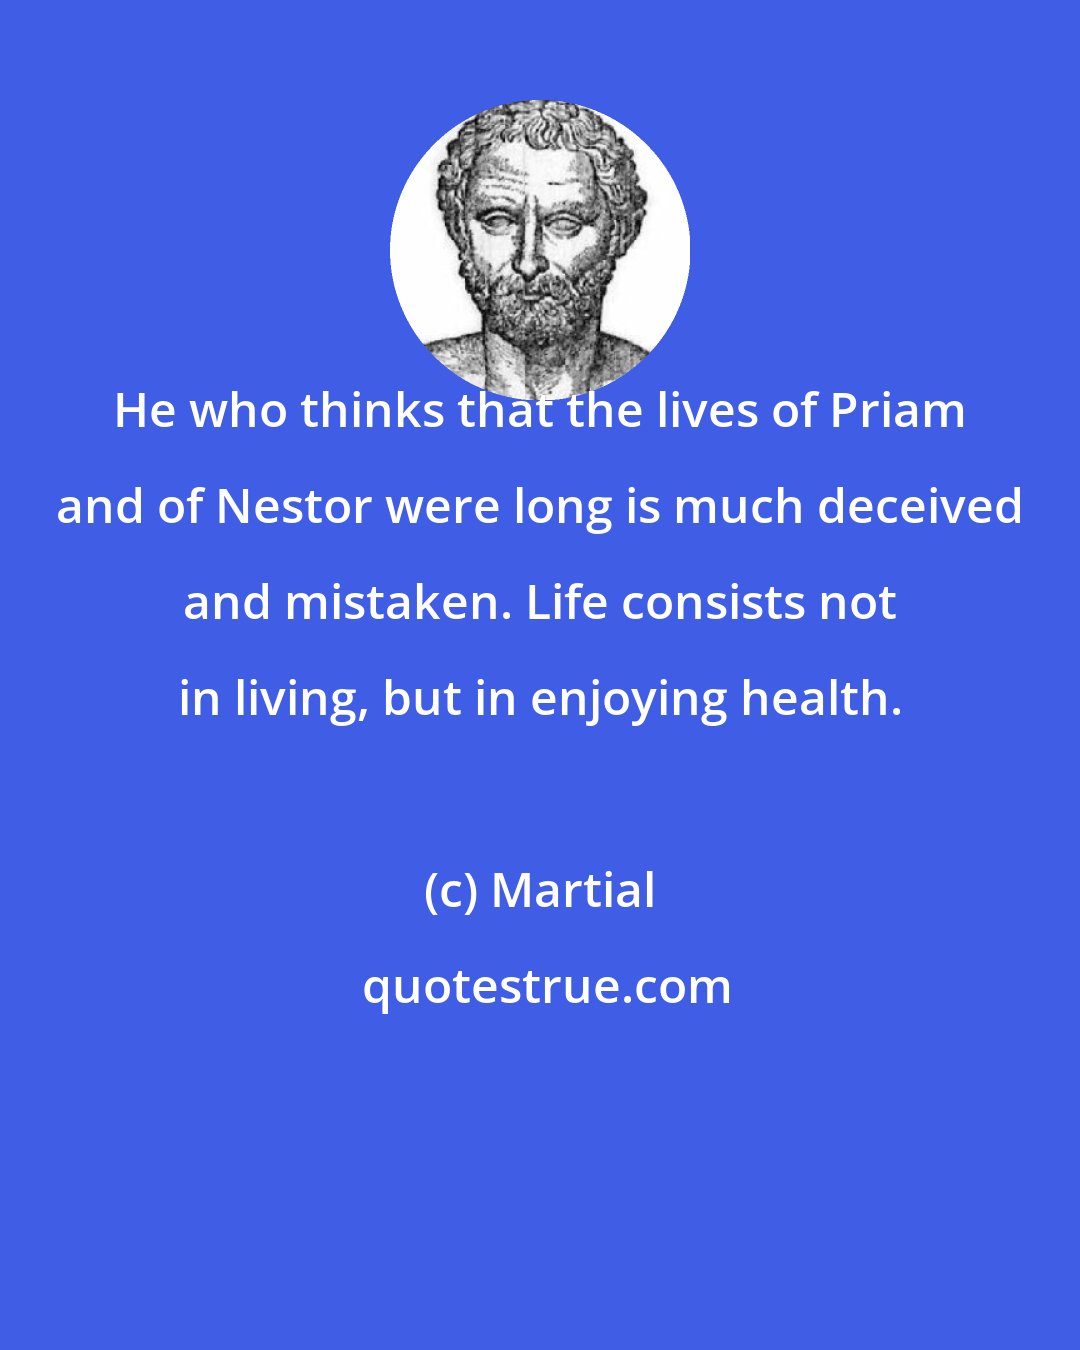 Martial: He who thinks that the lives of Priam and of Nestor were long is much deceived and mistaken. Life consists not in living, but in enjoying health.